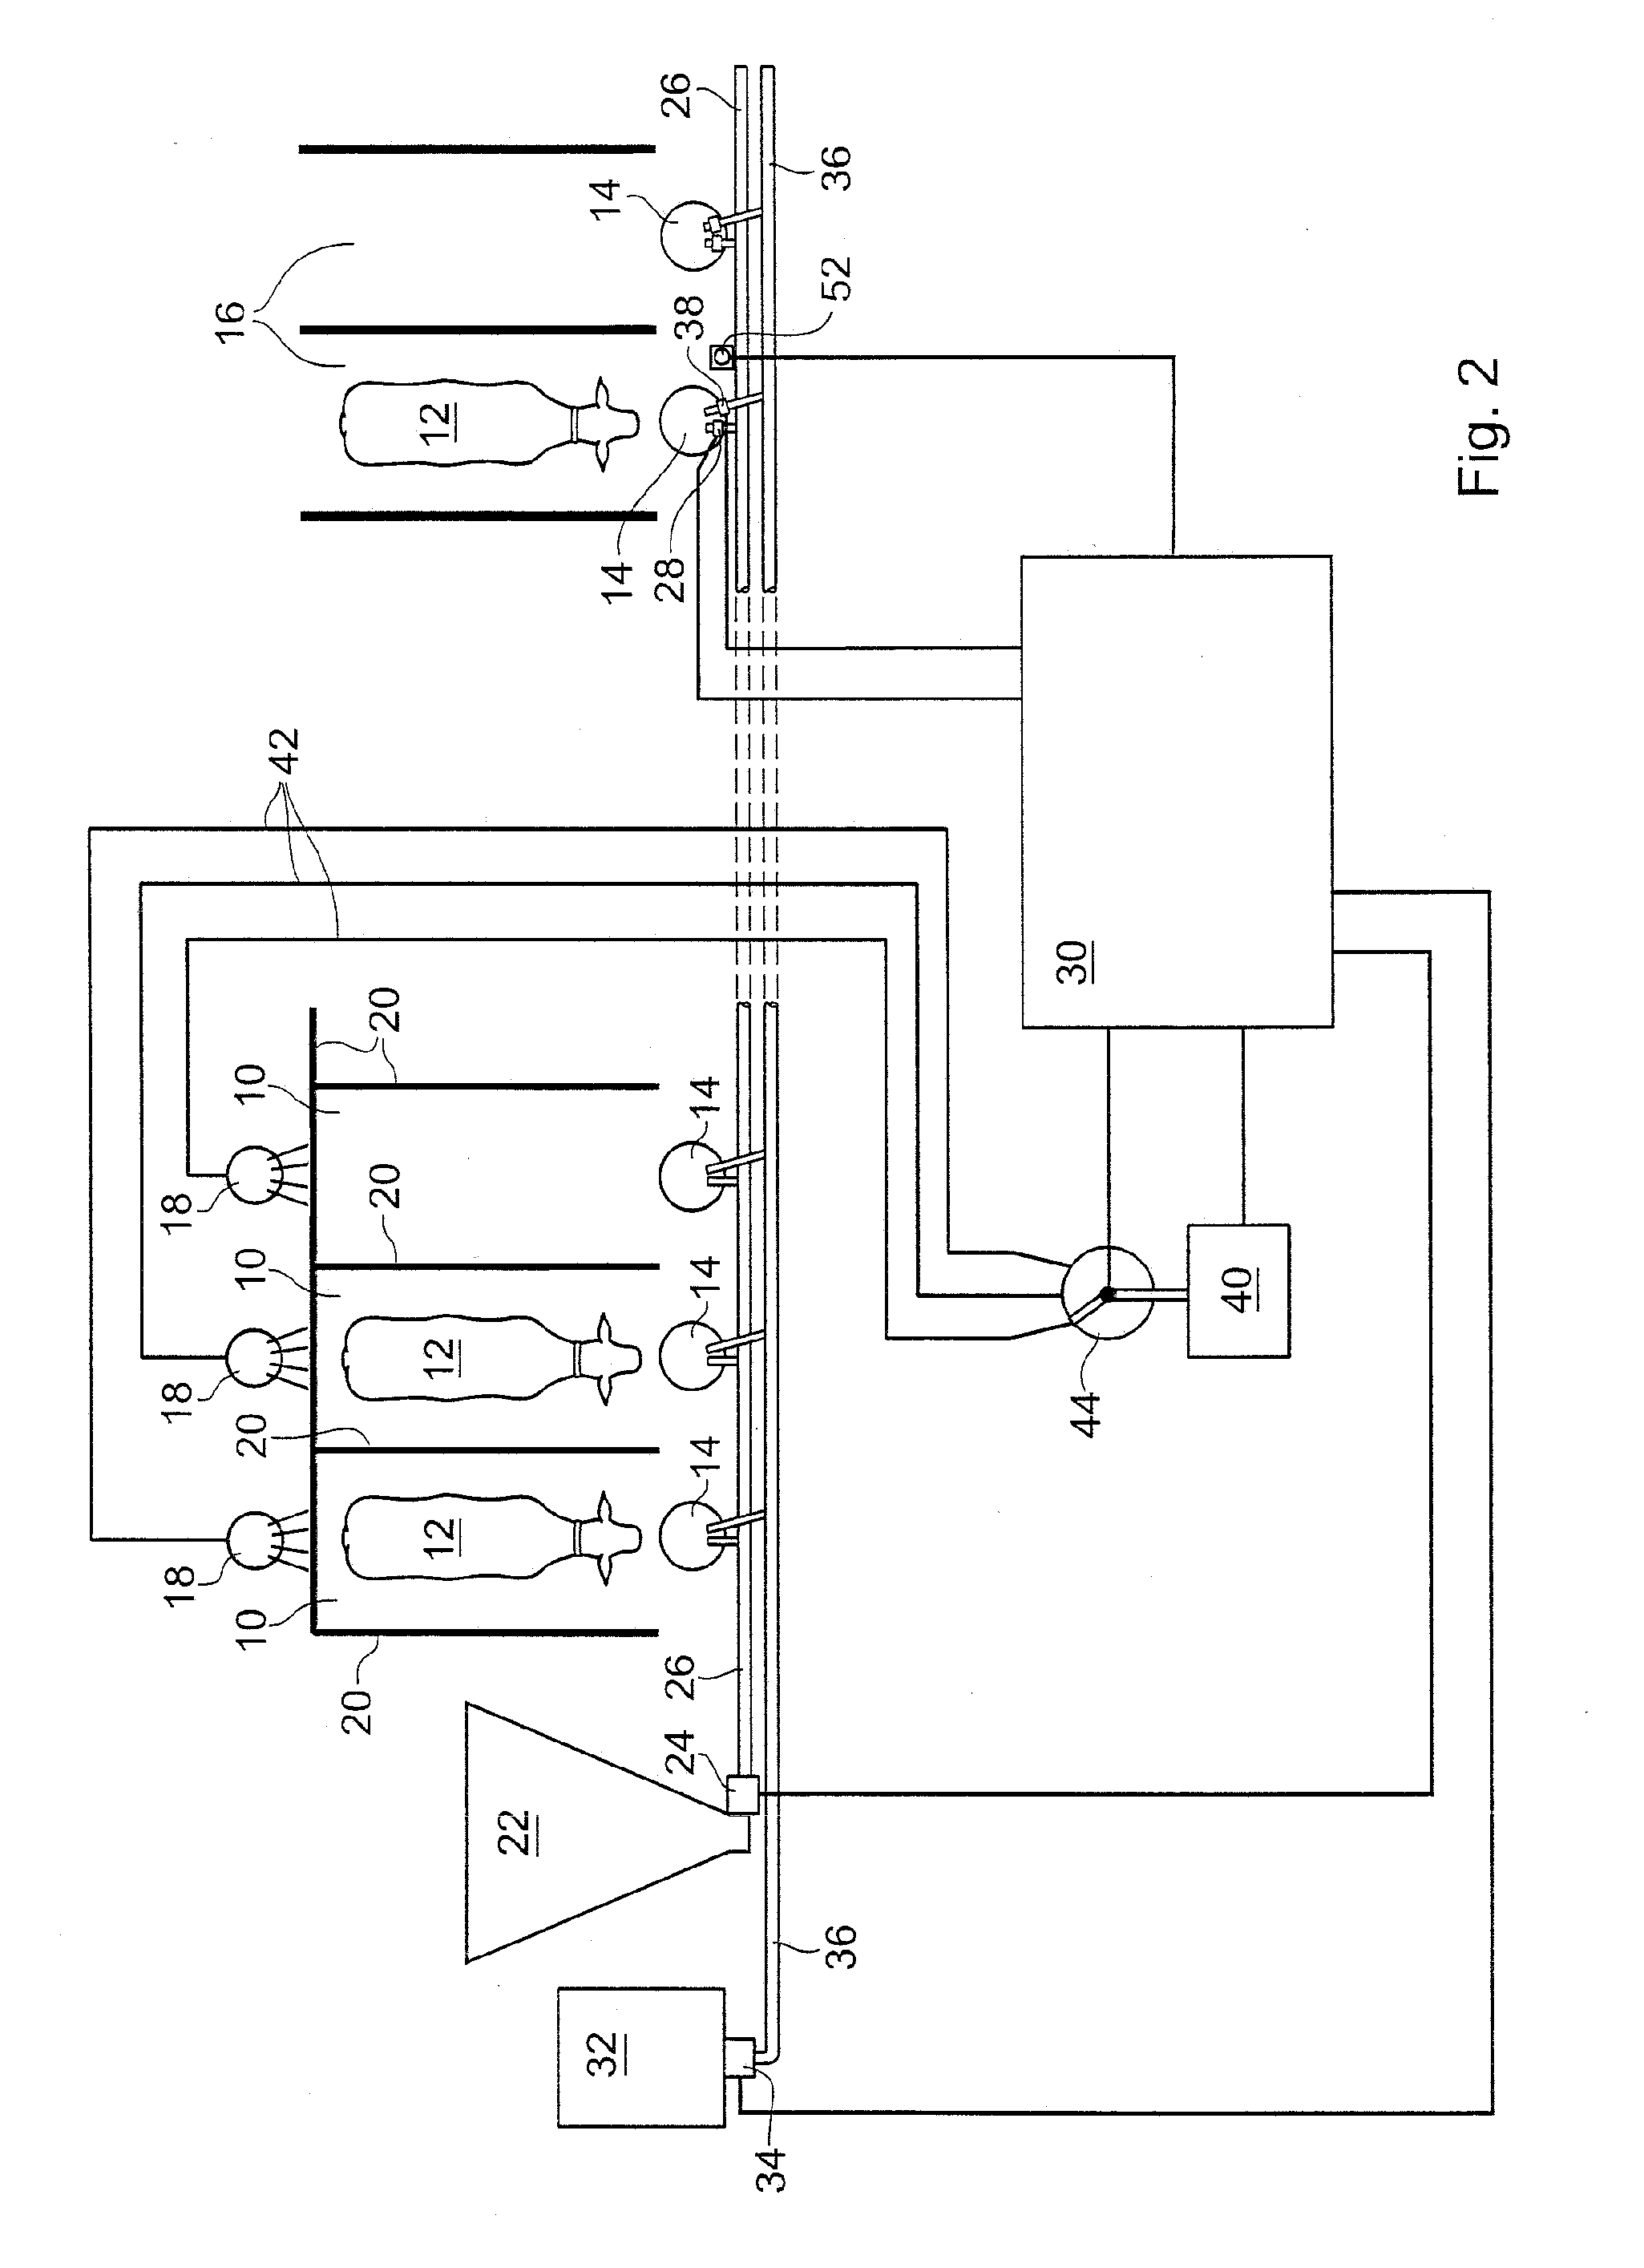 System for managing the supply of consumable matter to be consumed by milk producing animals